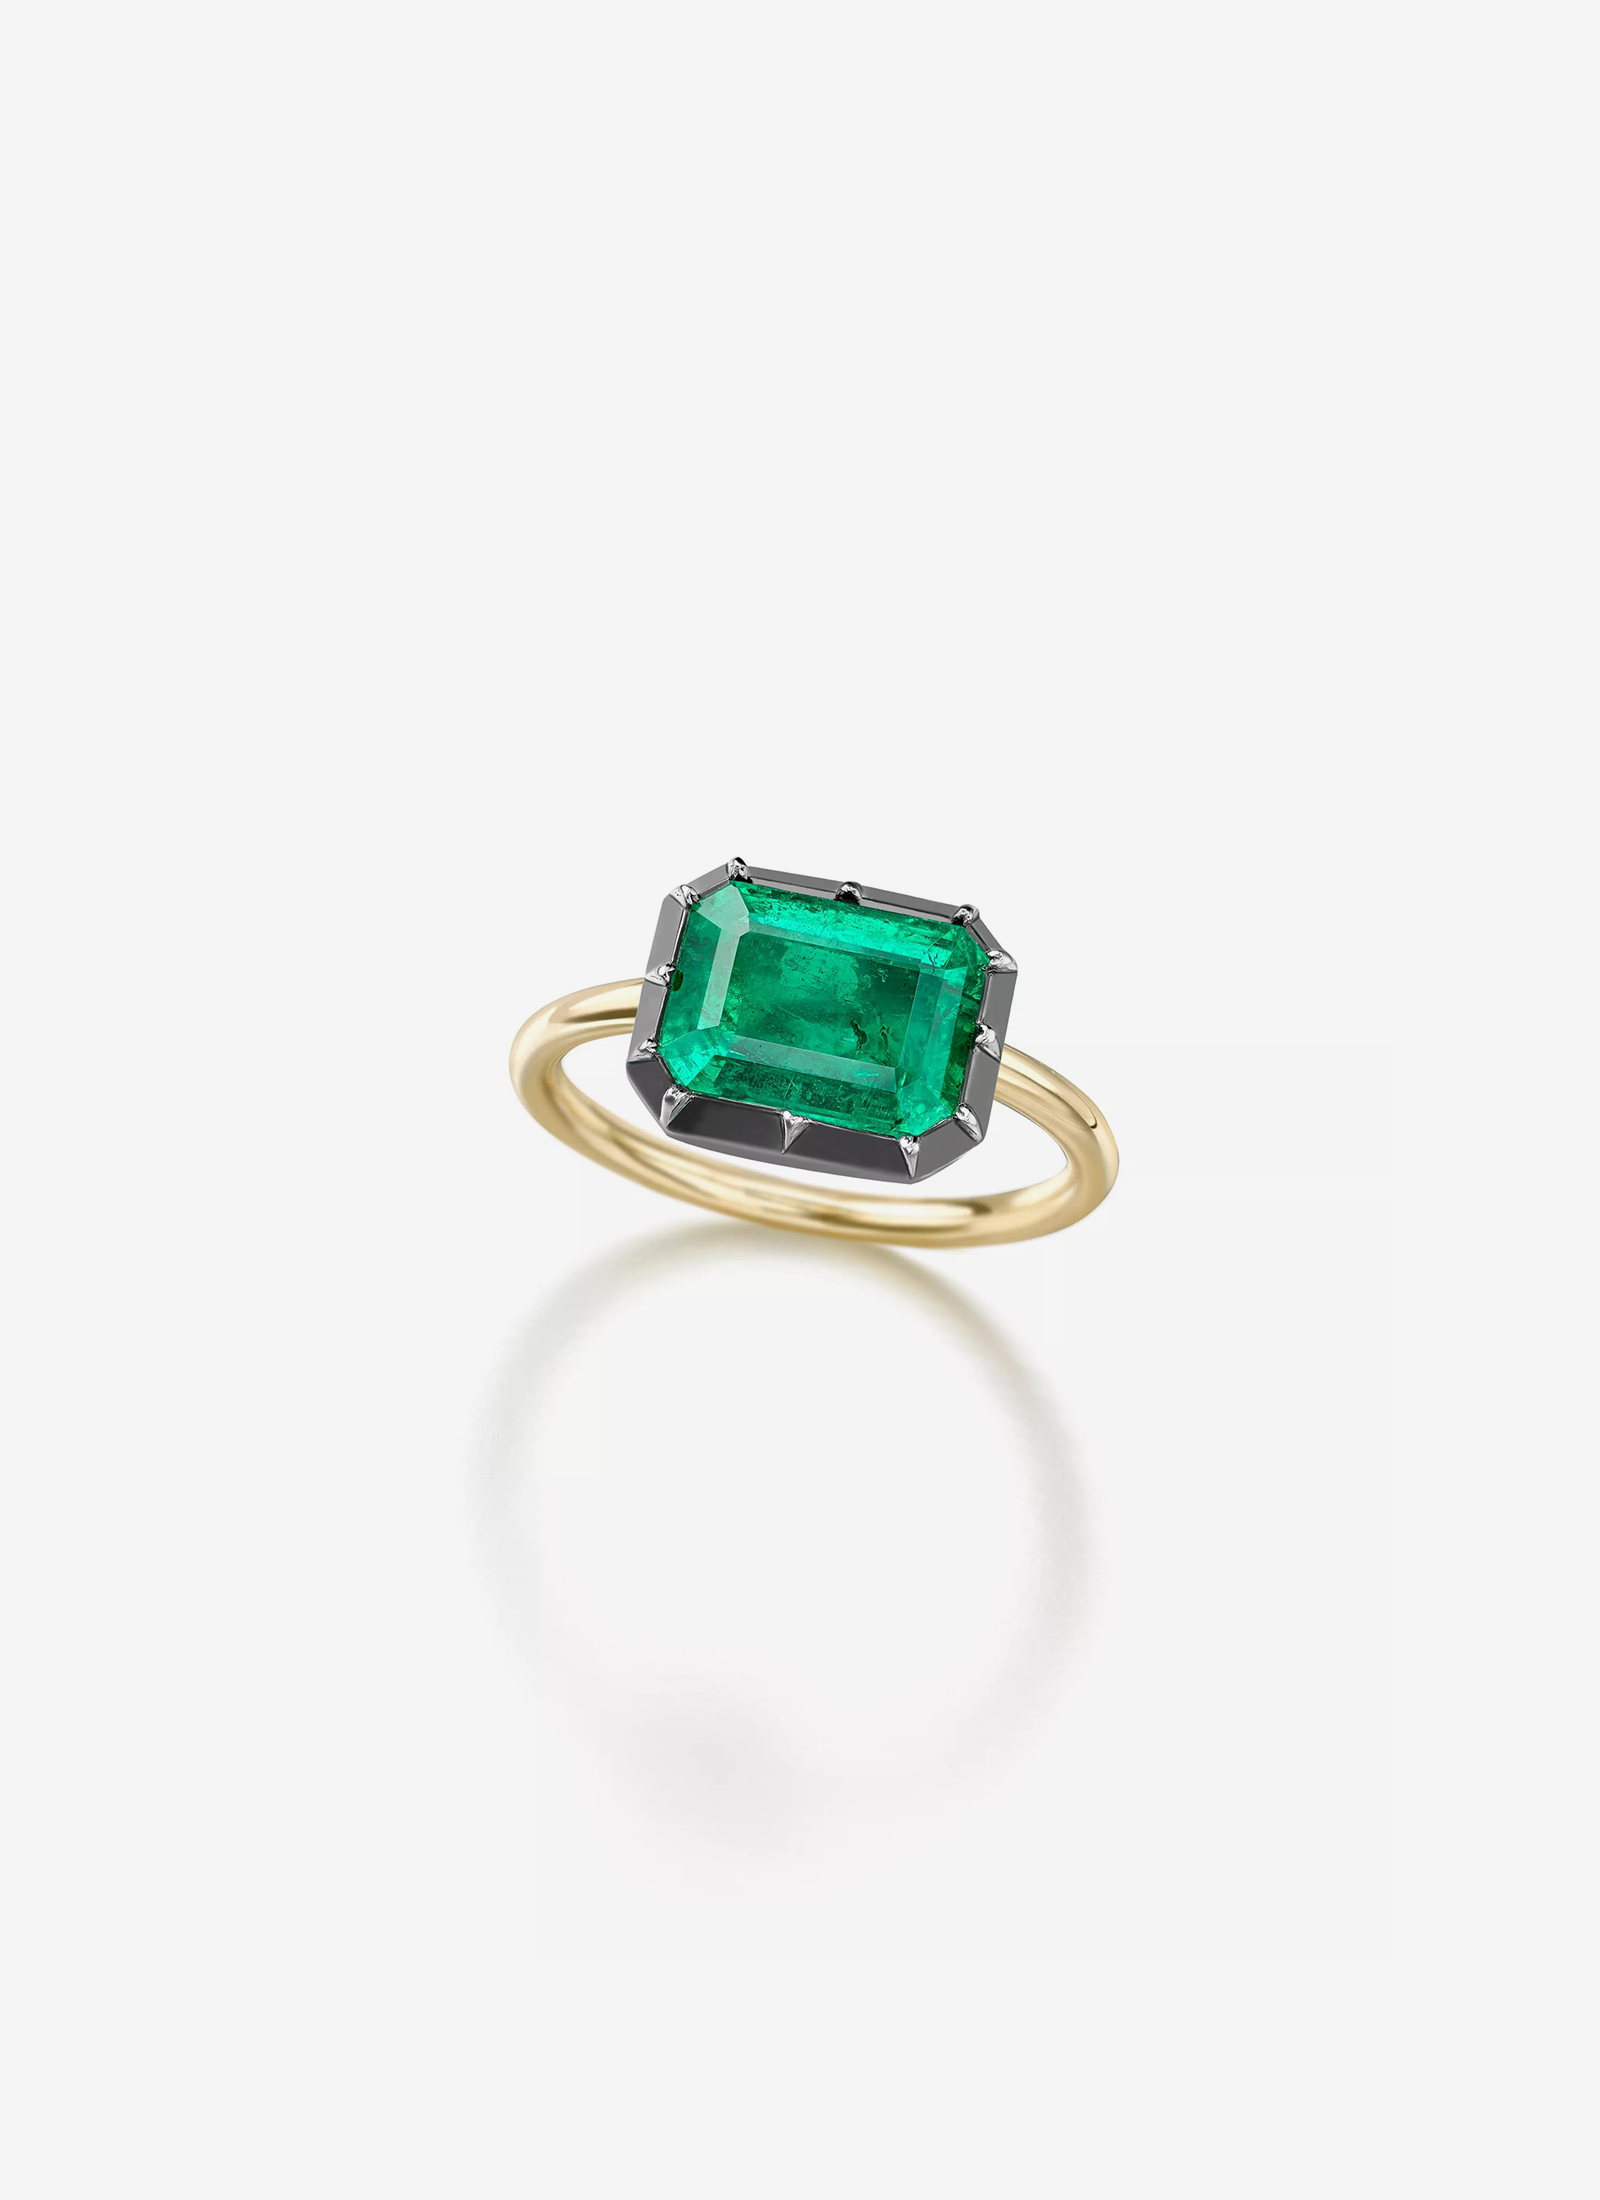 Button Back Emerald Ring - 2.22ct Emerald cut East/West